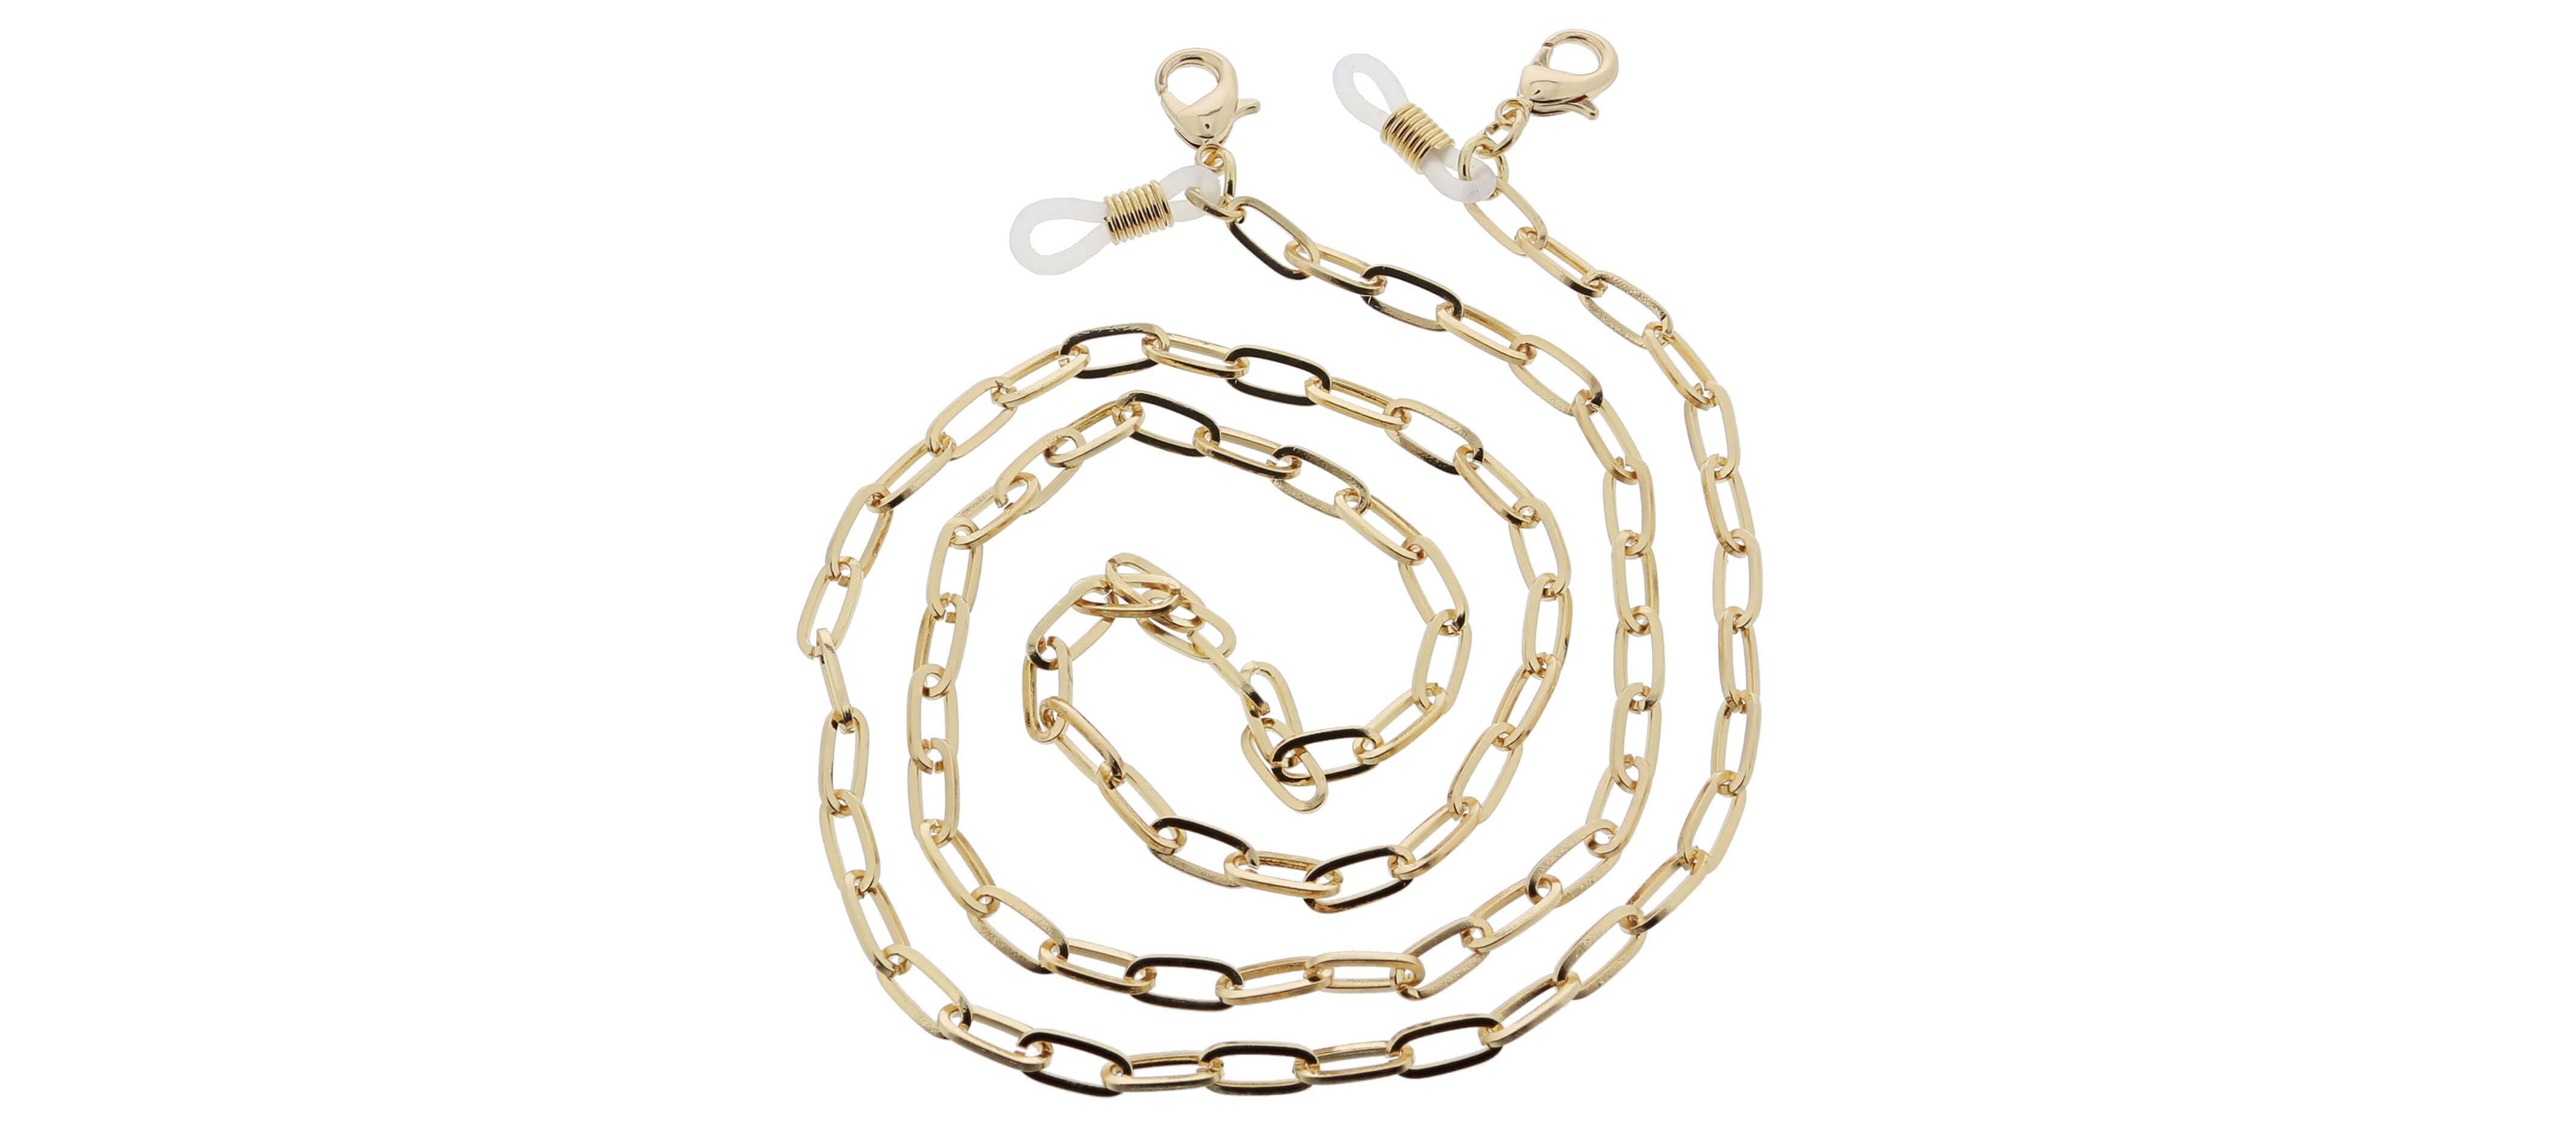 PeeperSpecs 3-in-1 Chain, Gold Link | Peepers